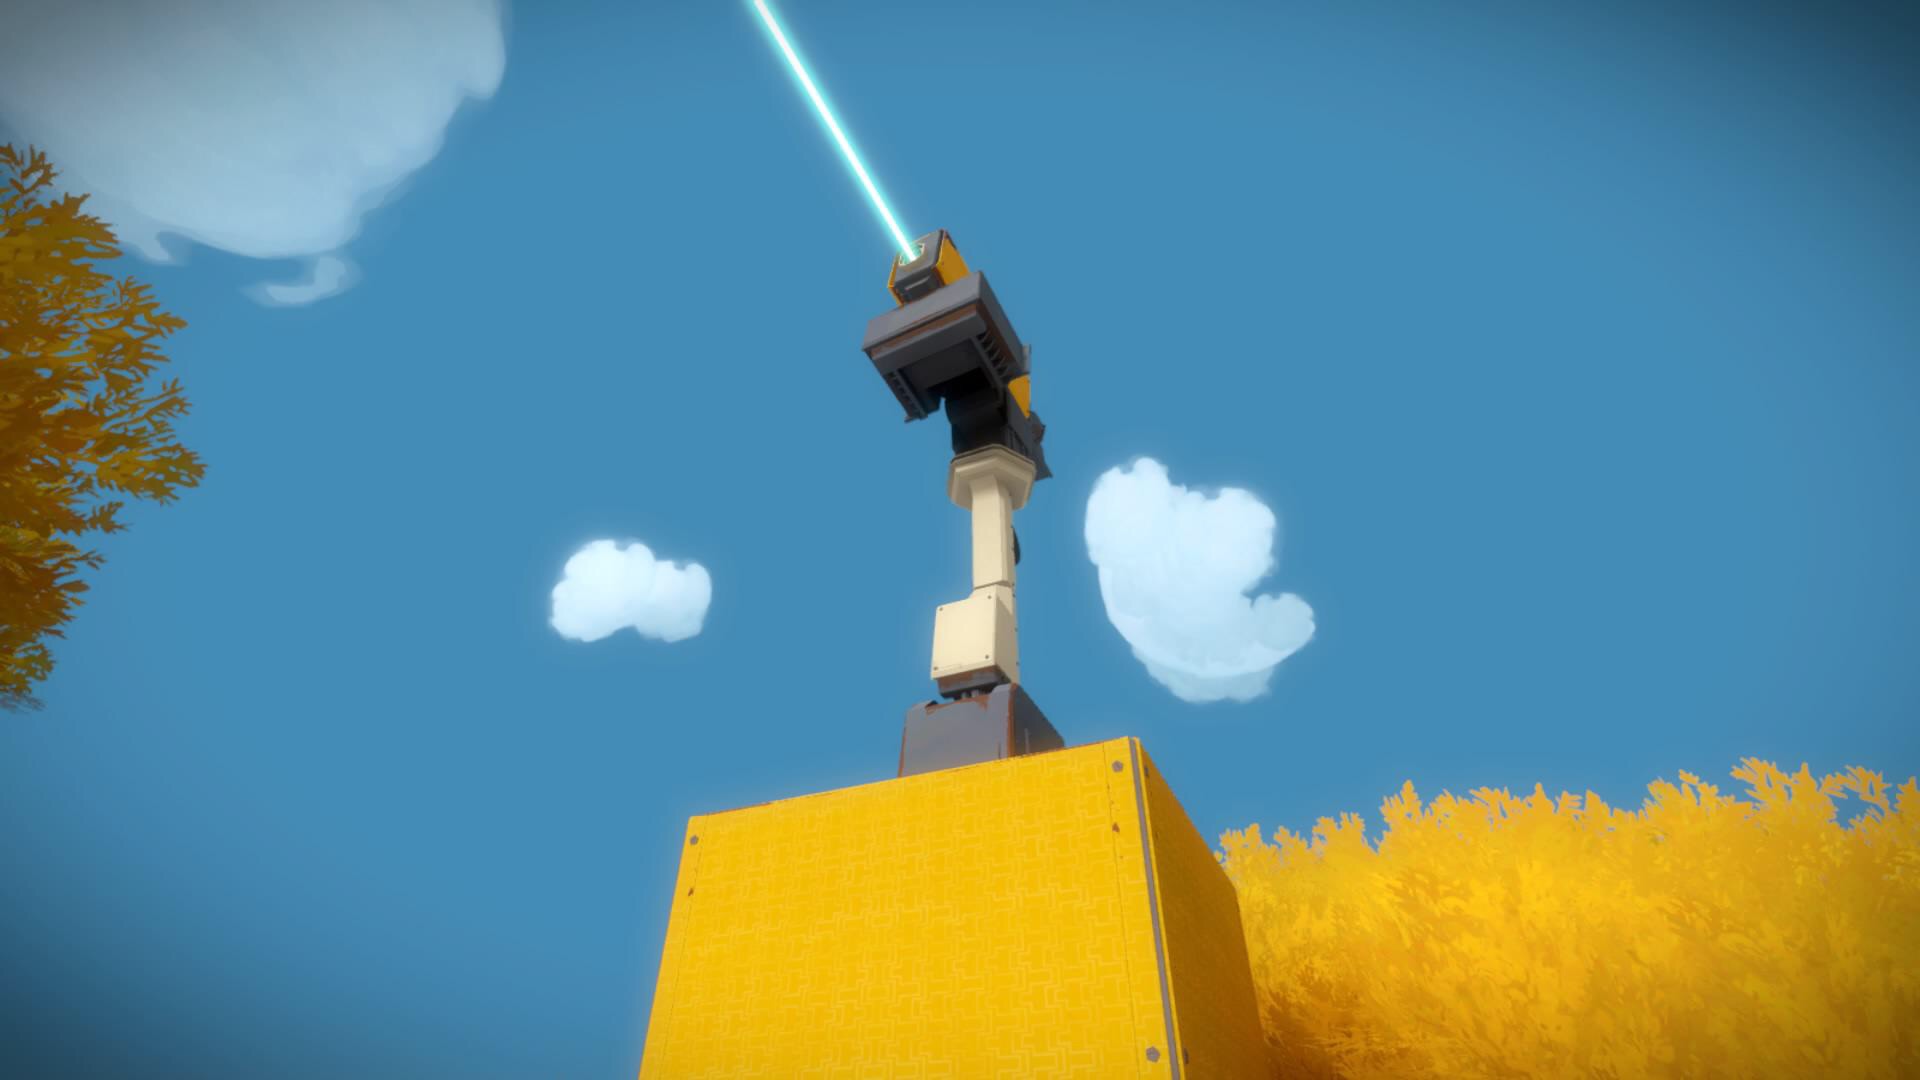 Ps4 The Witness クリア後の評価 感想と解説 ゆるスナ